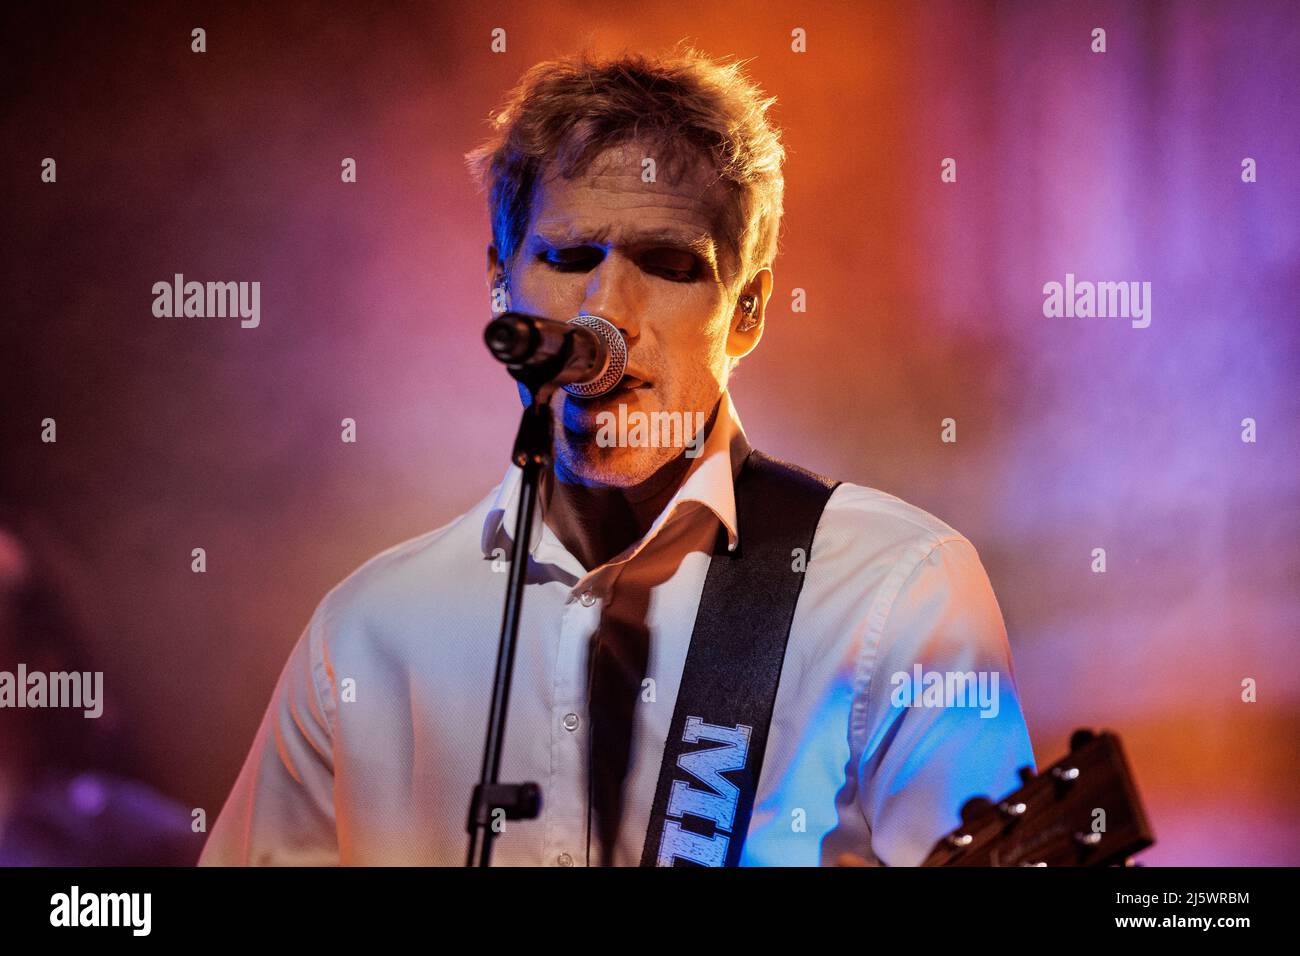 Roskilde, Denmark. 09th, April 2022. The Danish band Michael Learns to Rock performs a live concert at Gimle in Roskilde, Copenhagen. Here singer and musician Jascha Richter is seen live on stage. (Photo credit: Gonzales Photo - Thomas Rungstrom). Stock Photo